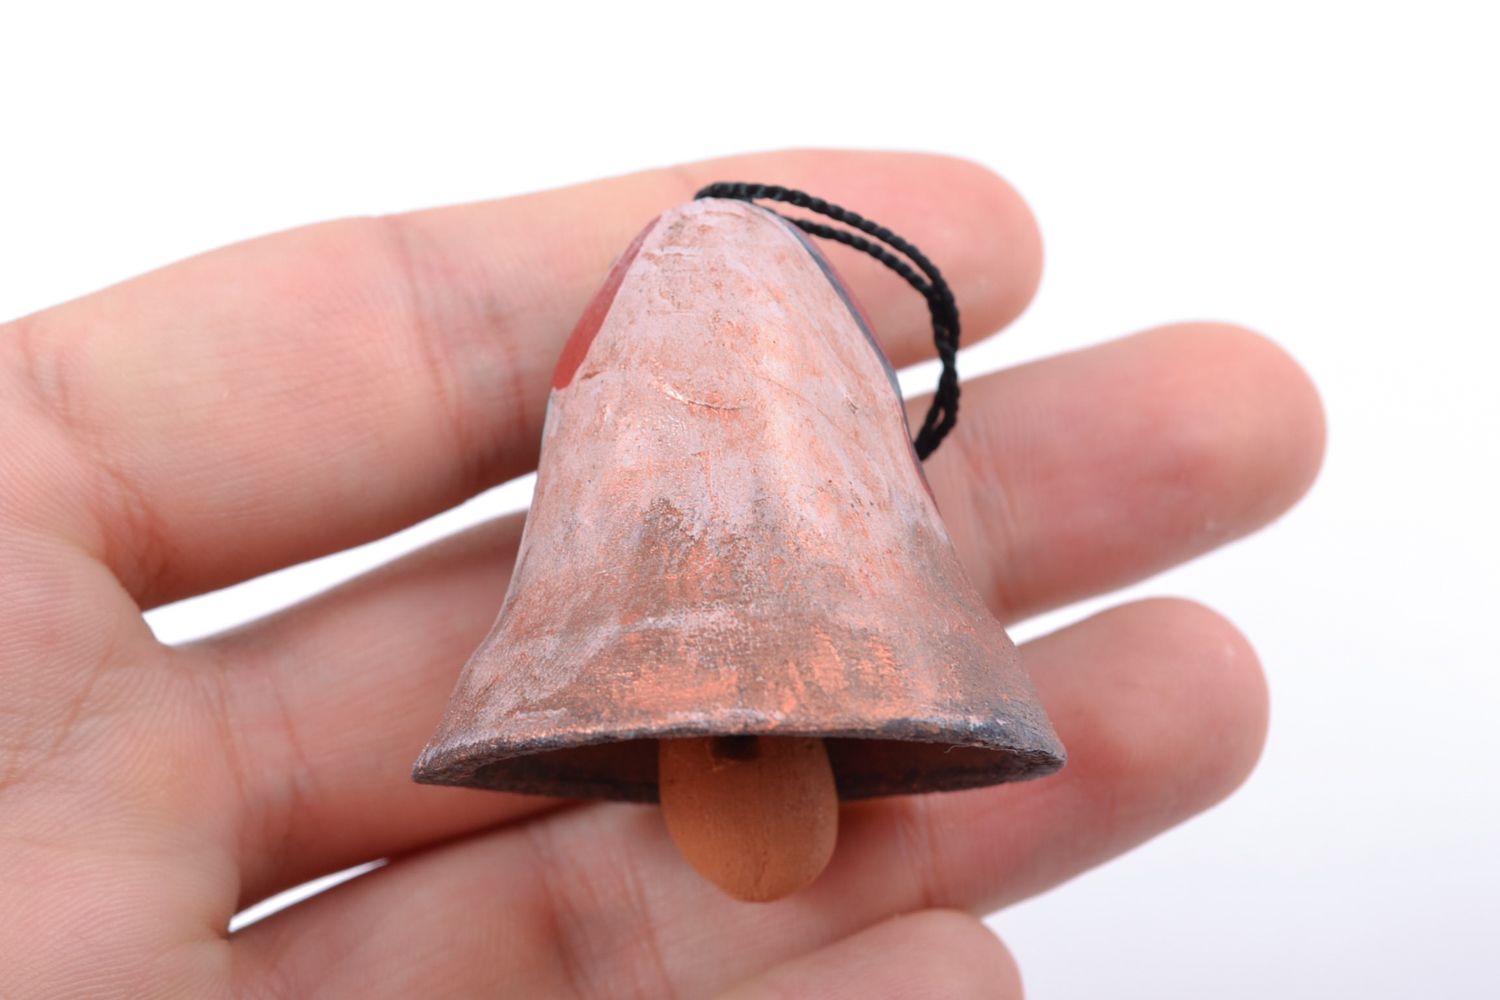 Ceramic bell with painting photo 2